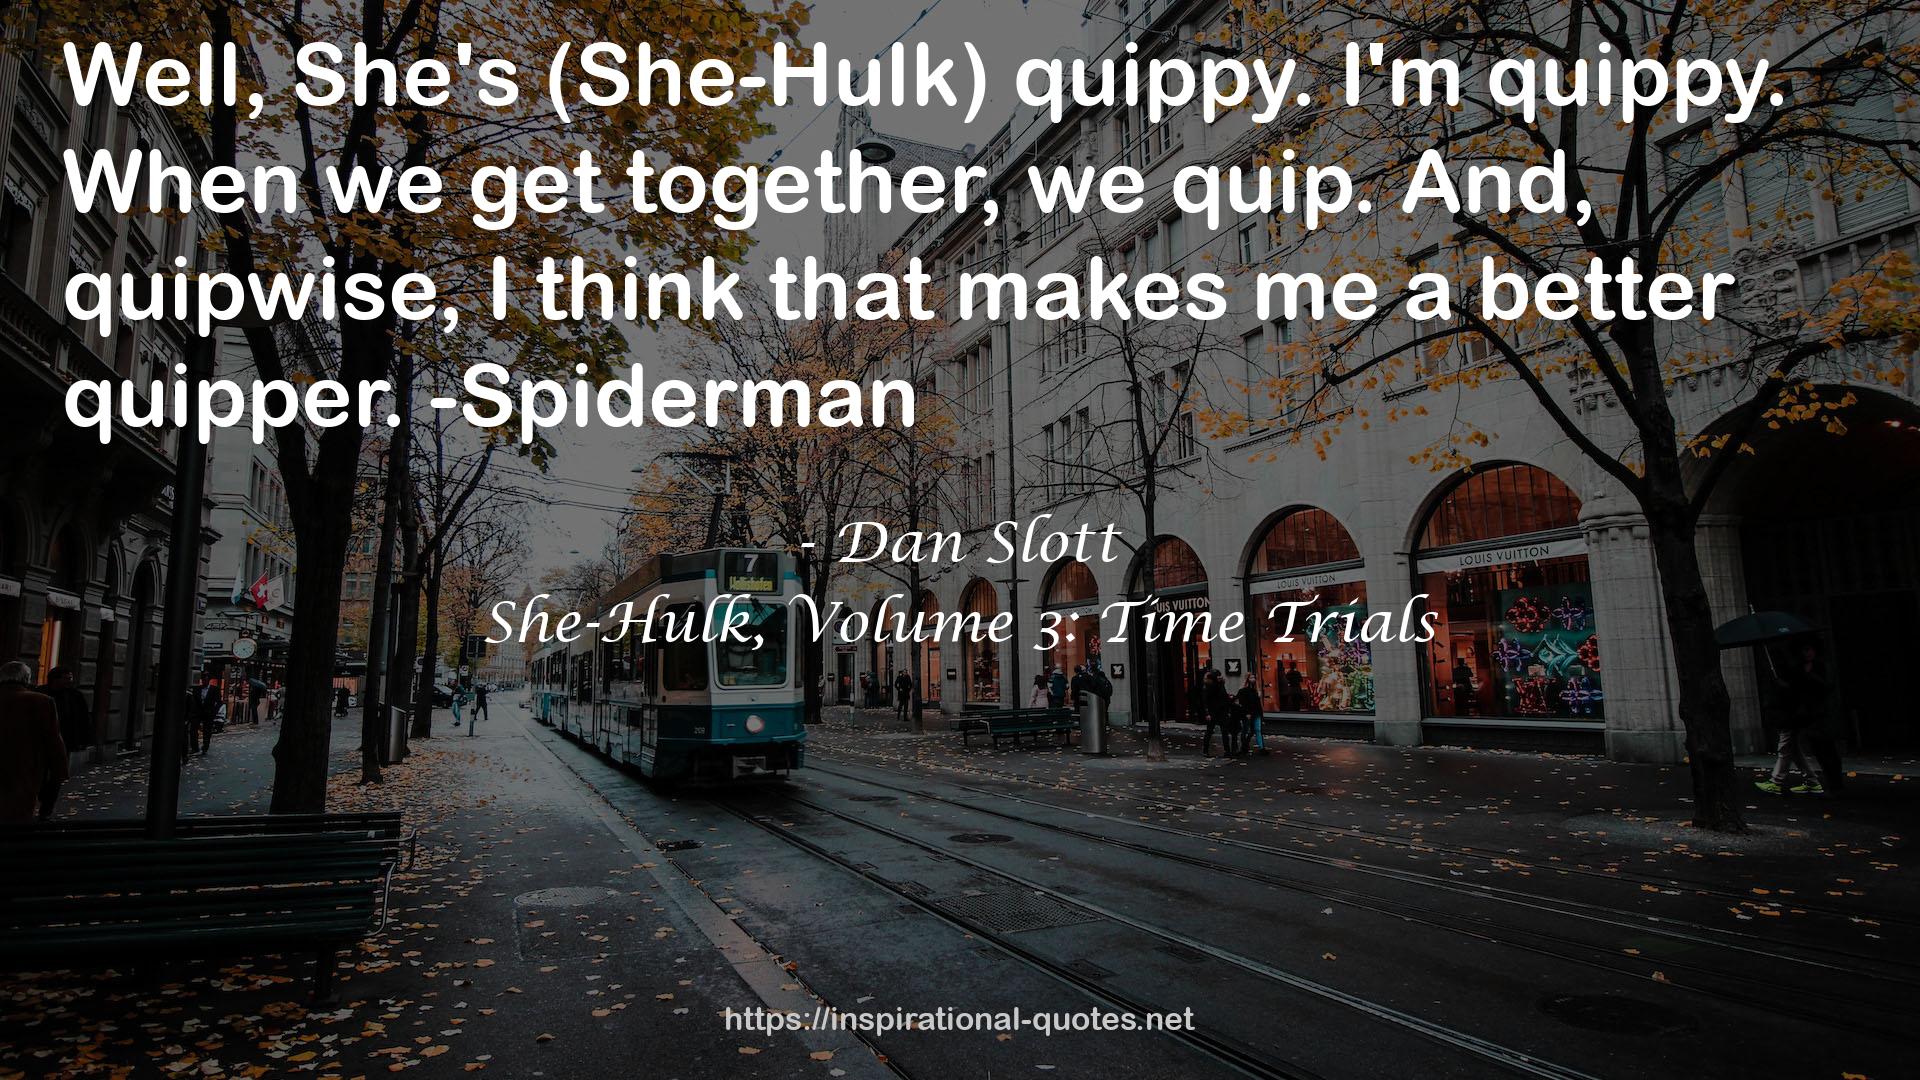 She-Hulk, Volume 3: Time Trials QUOTES